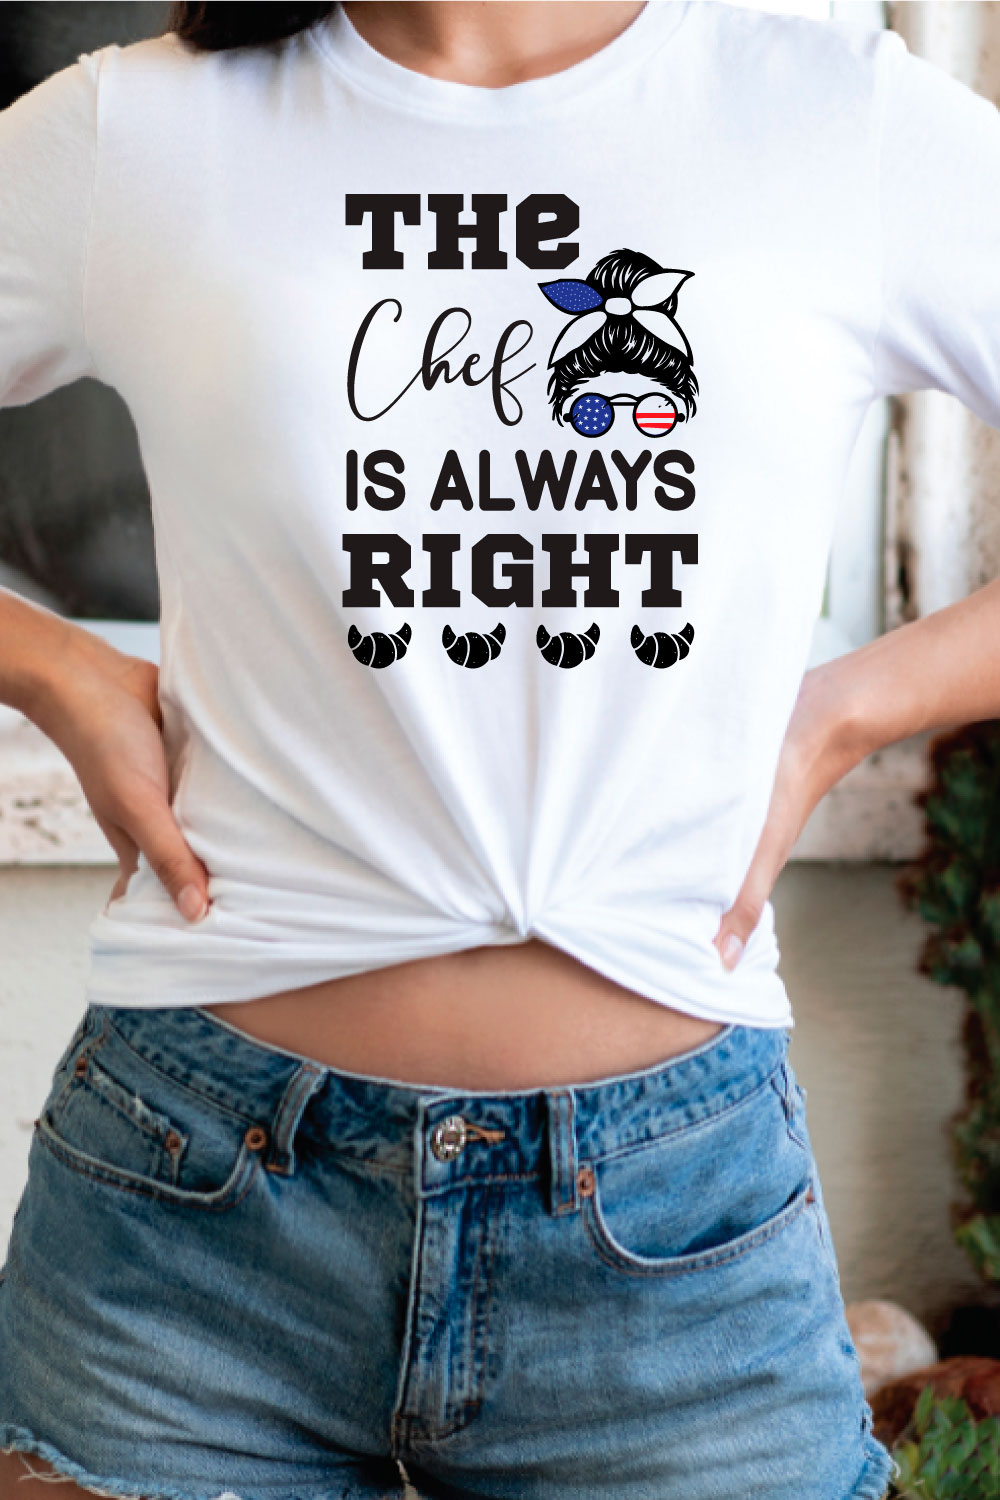 the chef is always right svg pinterest preview image.